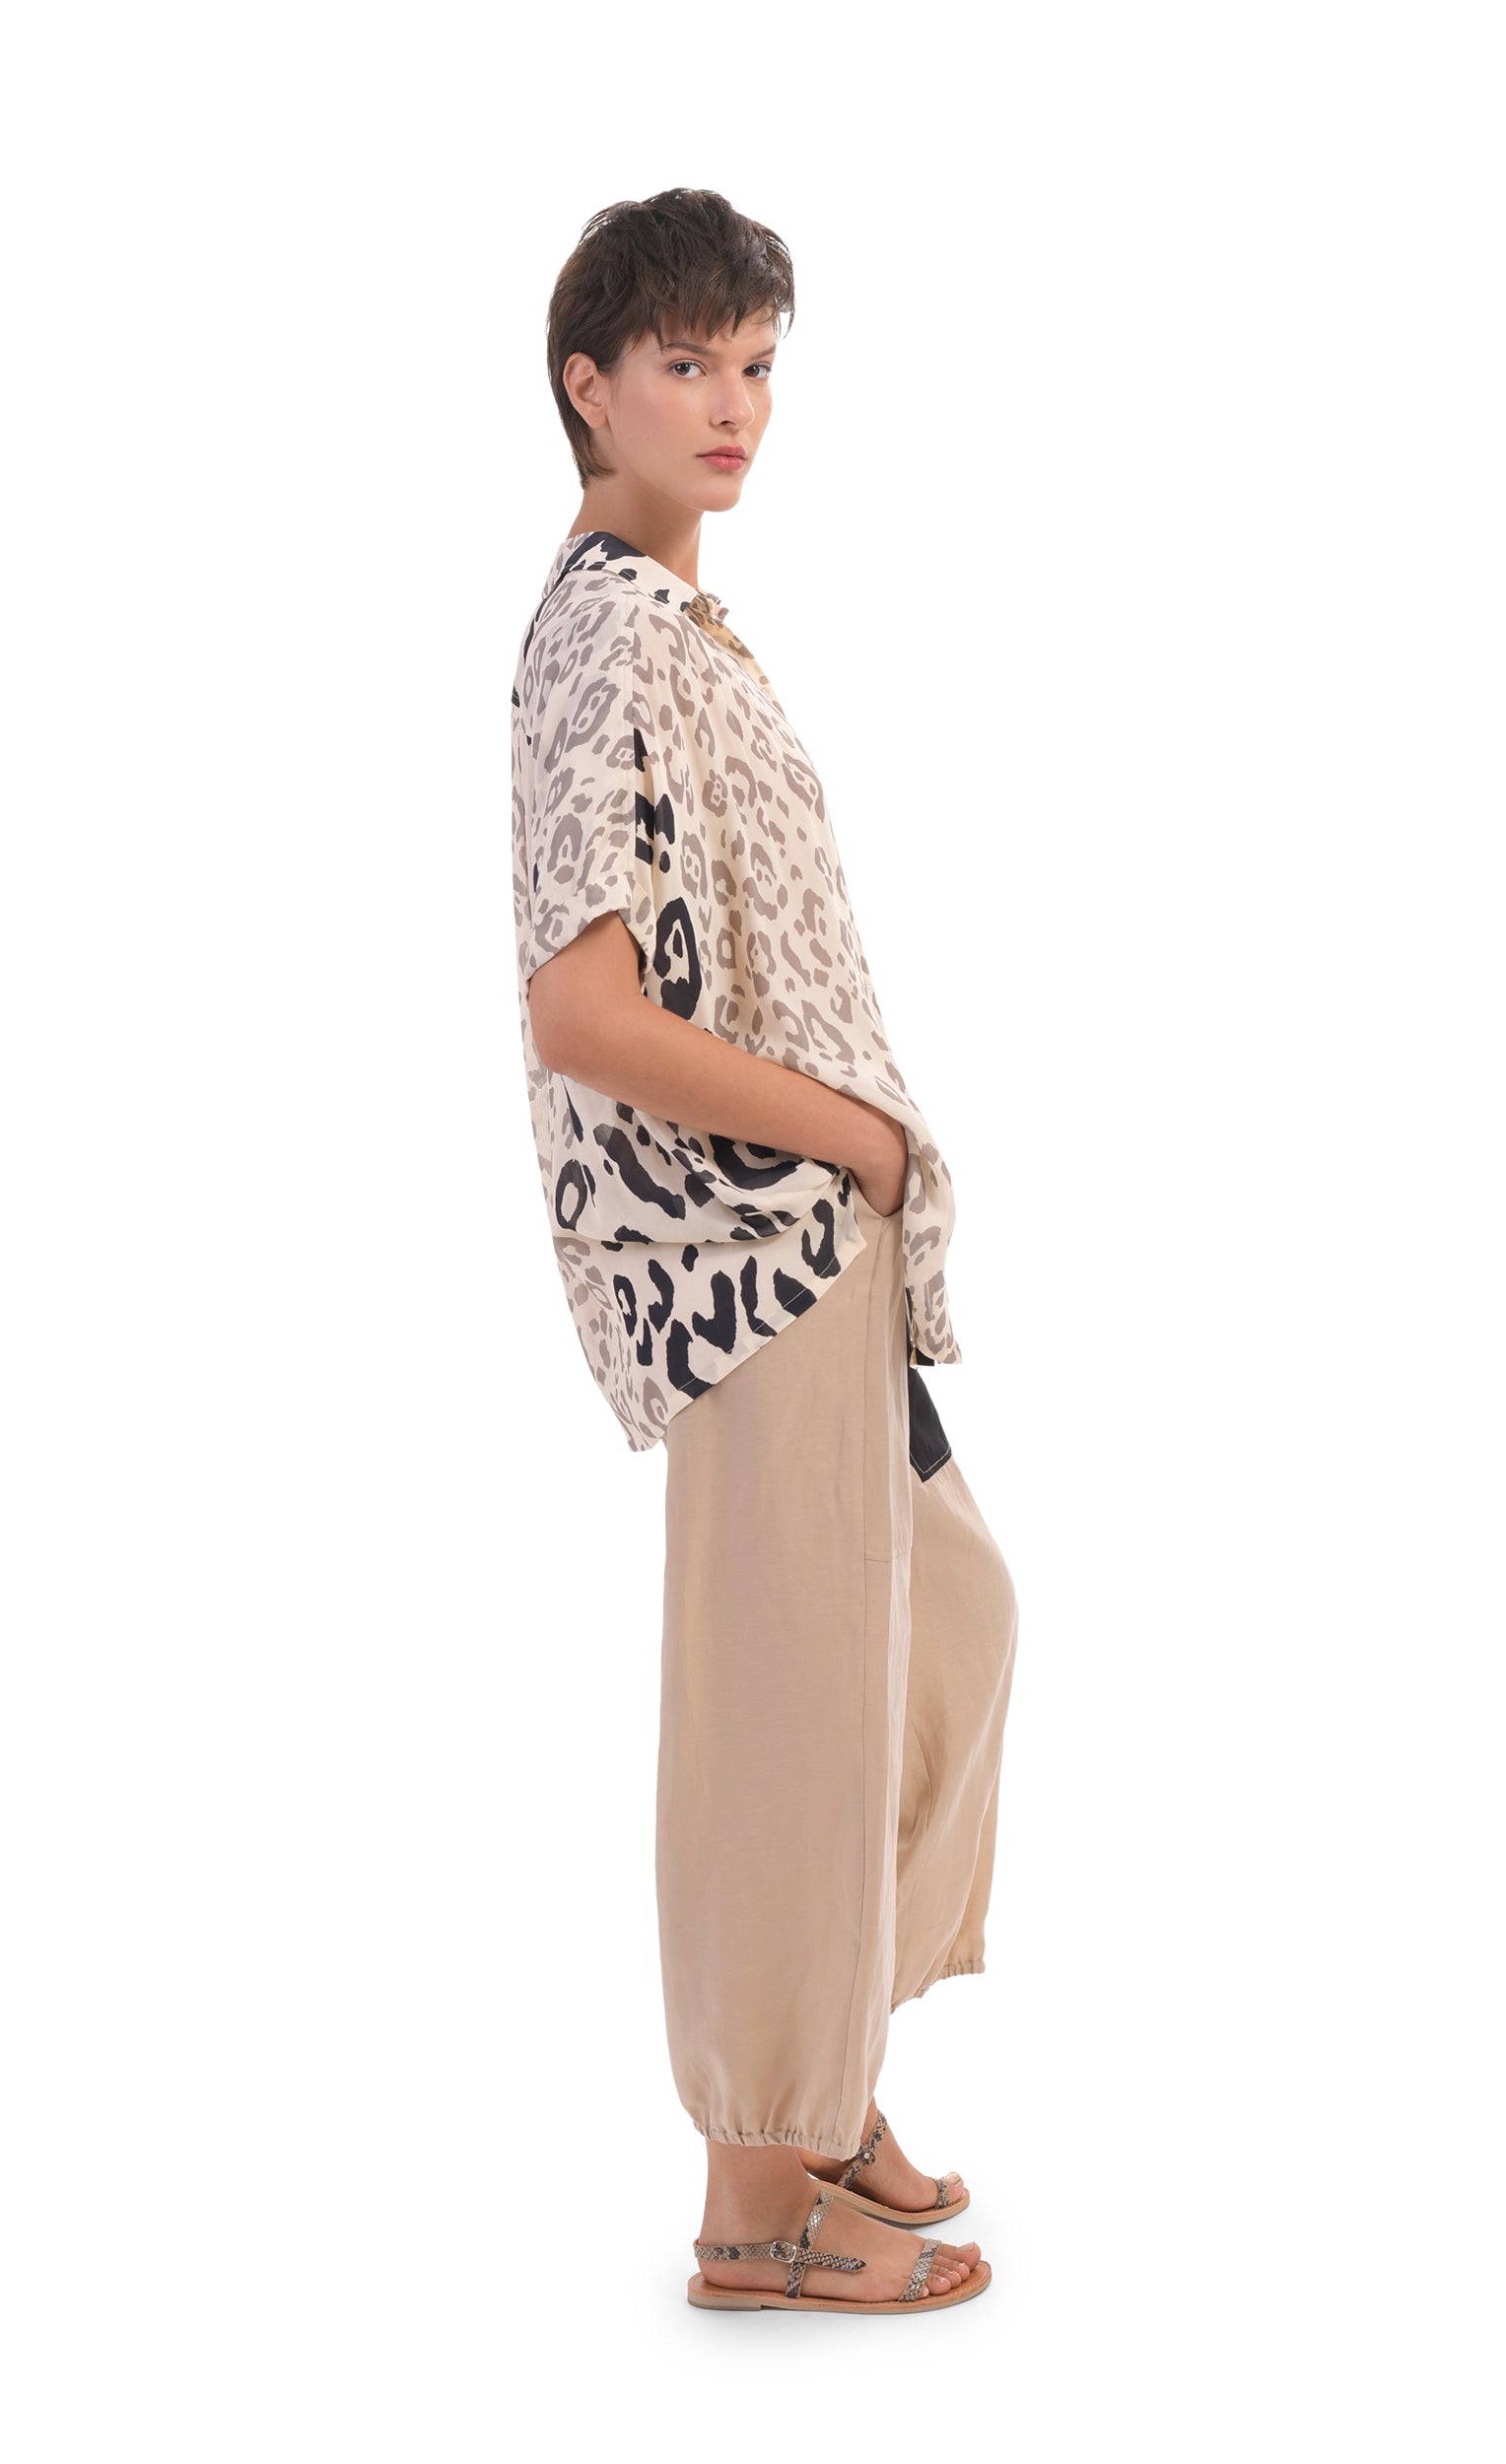 Right side full body view of a woman wearing the alembika Cheetah Print Button Down Top. This top has different panels of black and taupe cheetah print on a creme background. The top has short dolman sleeves. On the bottom the woman is wearing cream pants.